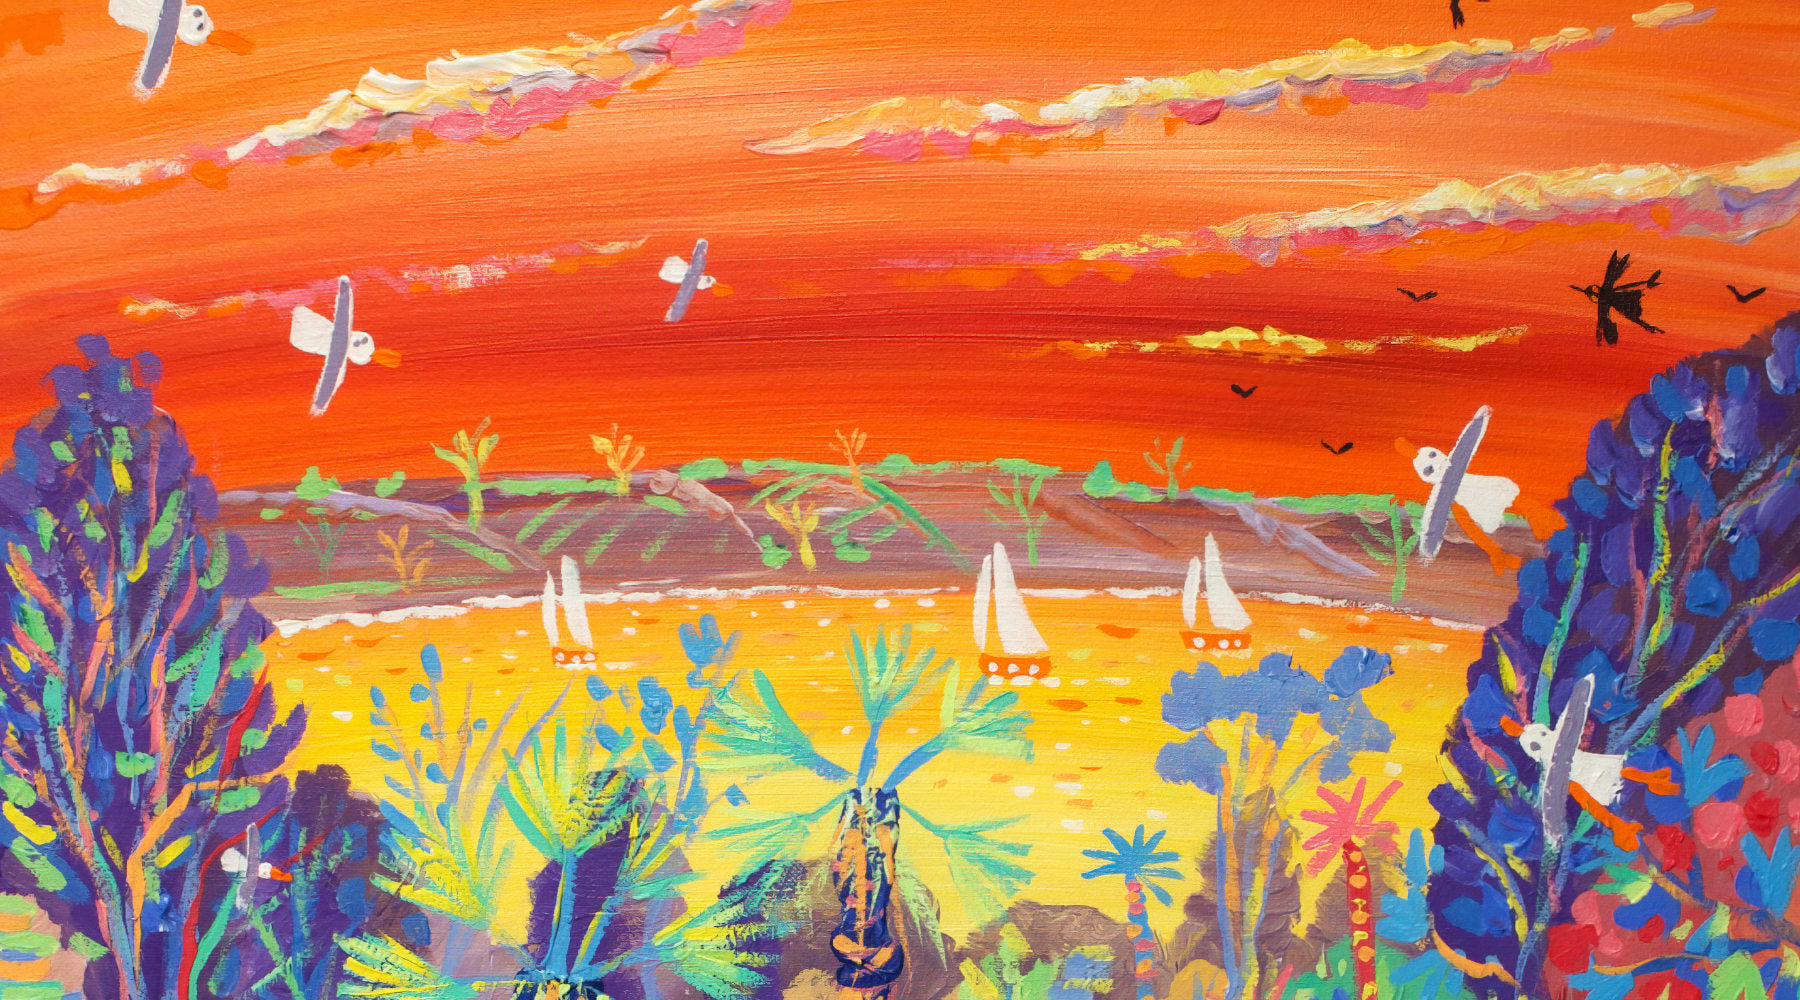 Sunset Painting: Discover the Beauty of Nature Through Art